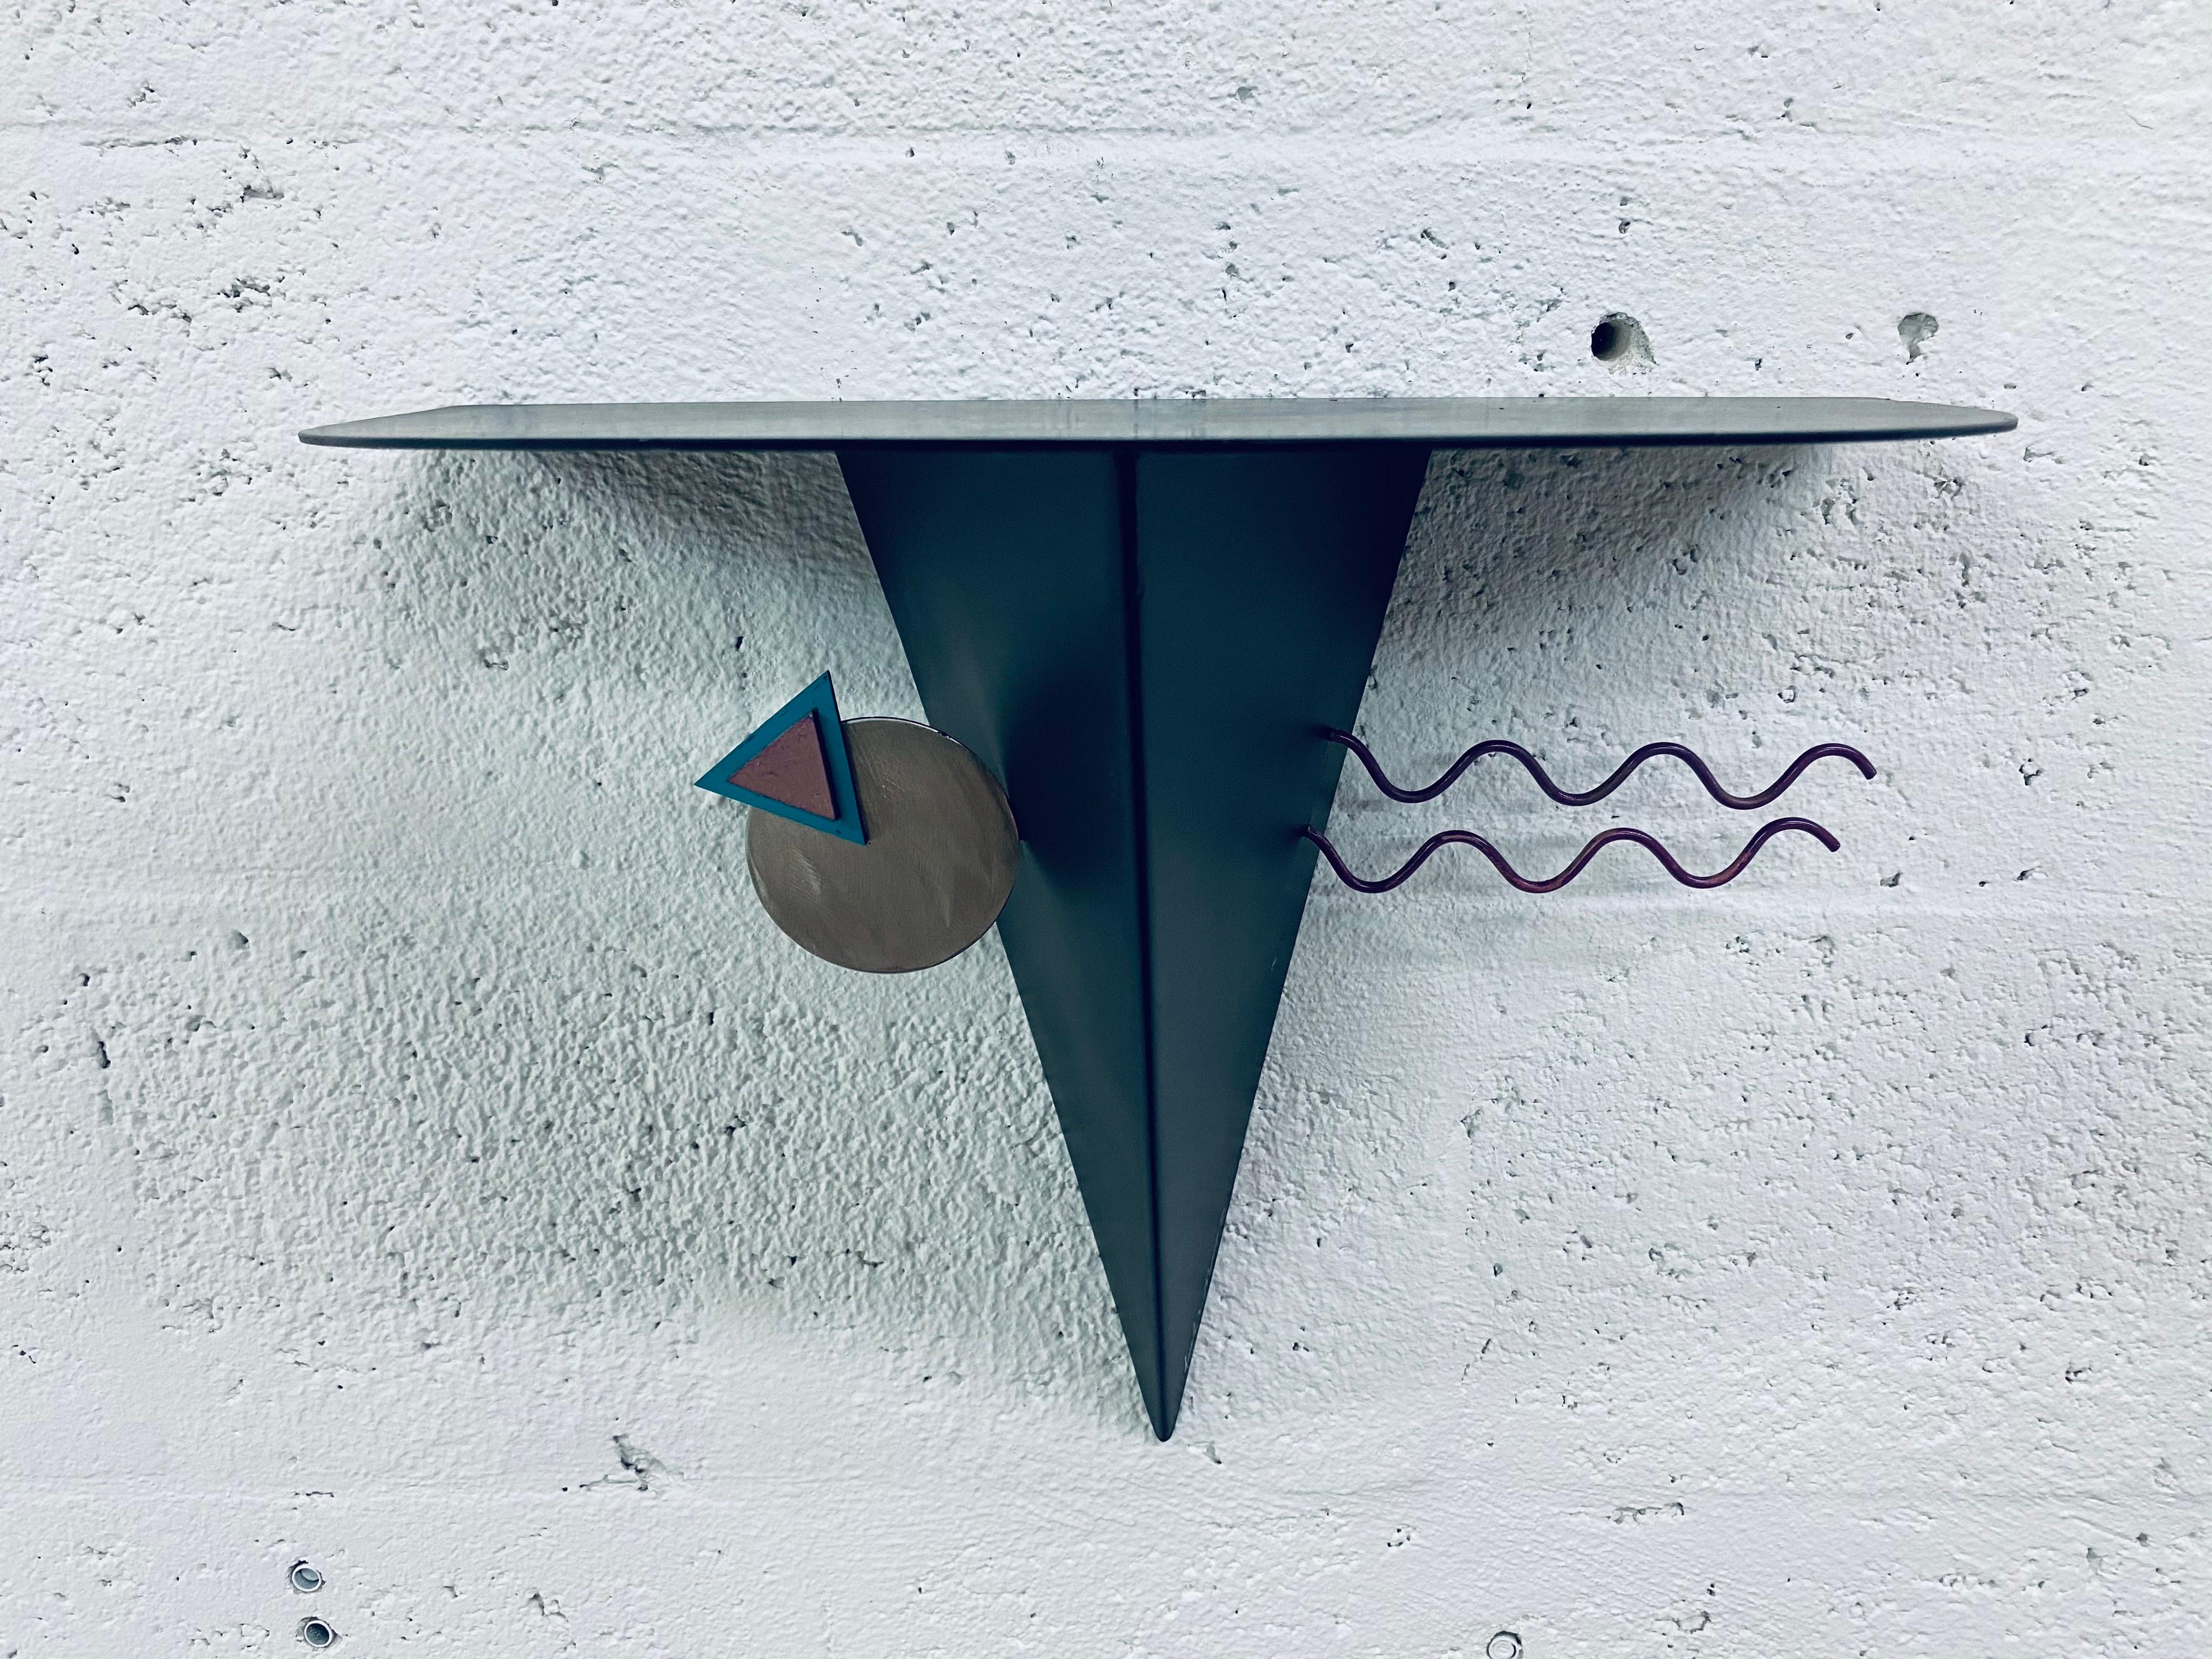 Artist signed postmodern Memphis style wall shelf with half circle top, Circa 1980s.  There are three shelves available with different shaped tops, see other listings at That Galerie.